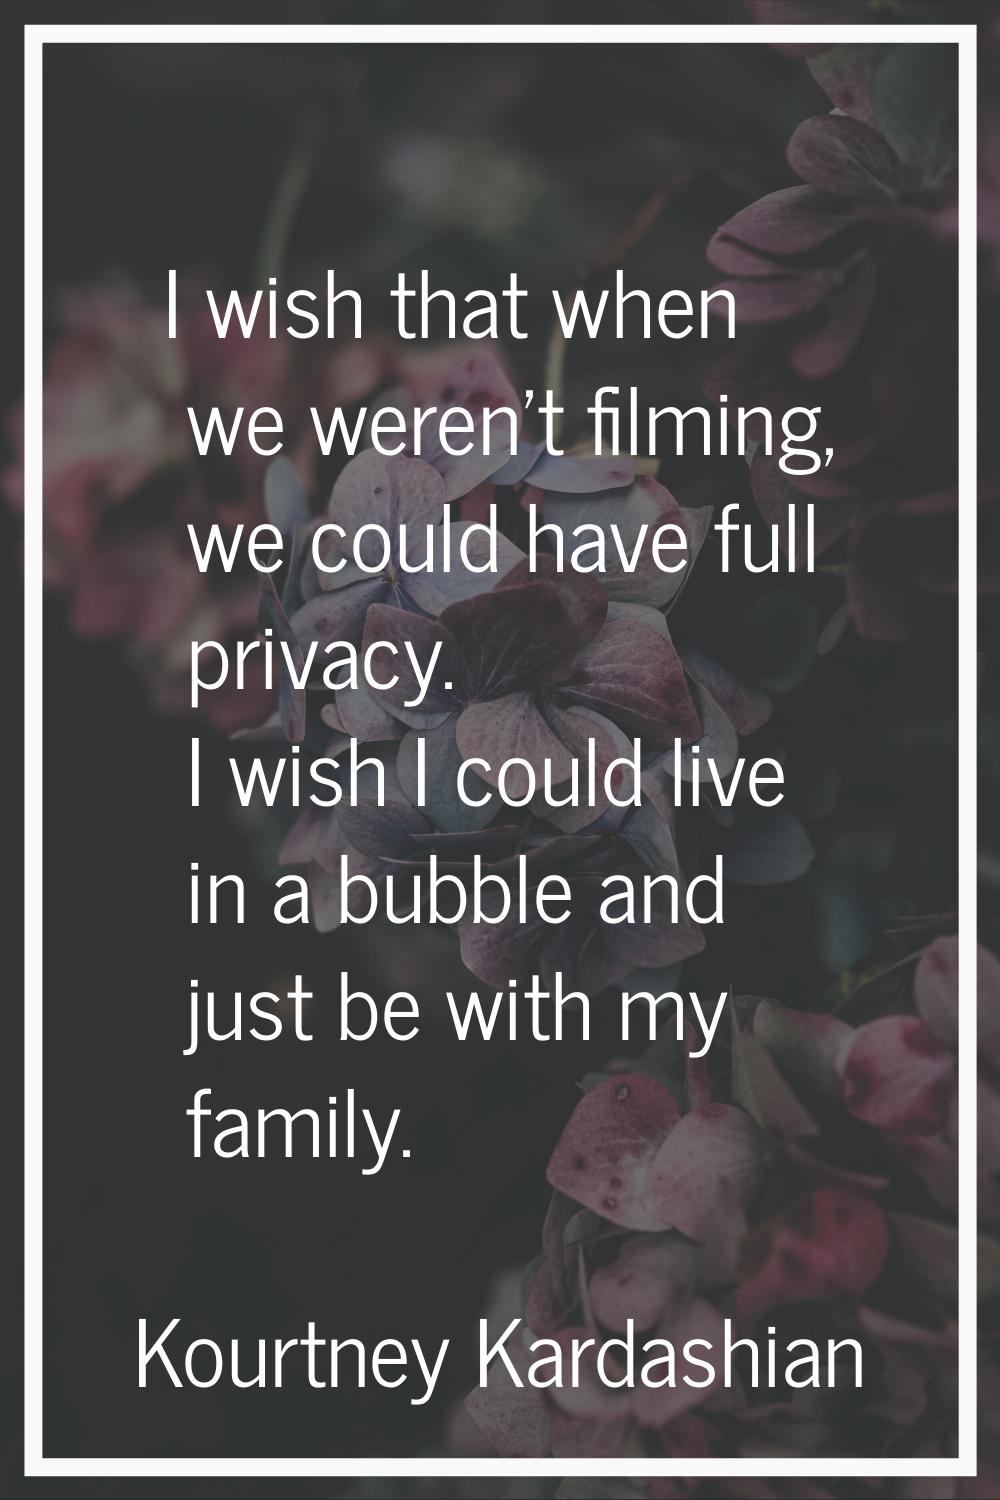 I wish that when we weren't filming, we could have full privacy. I wish I could live in a bubble an